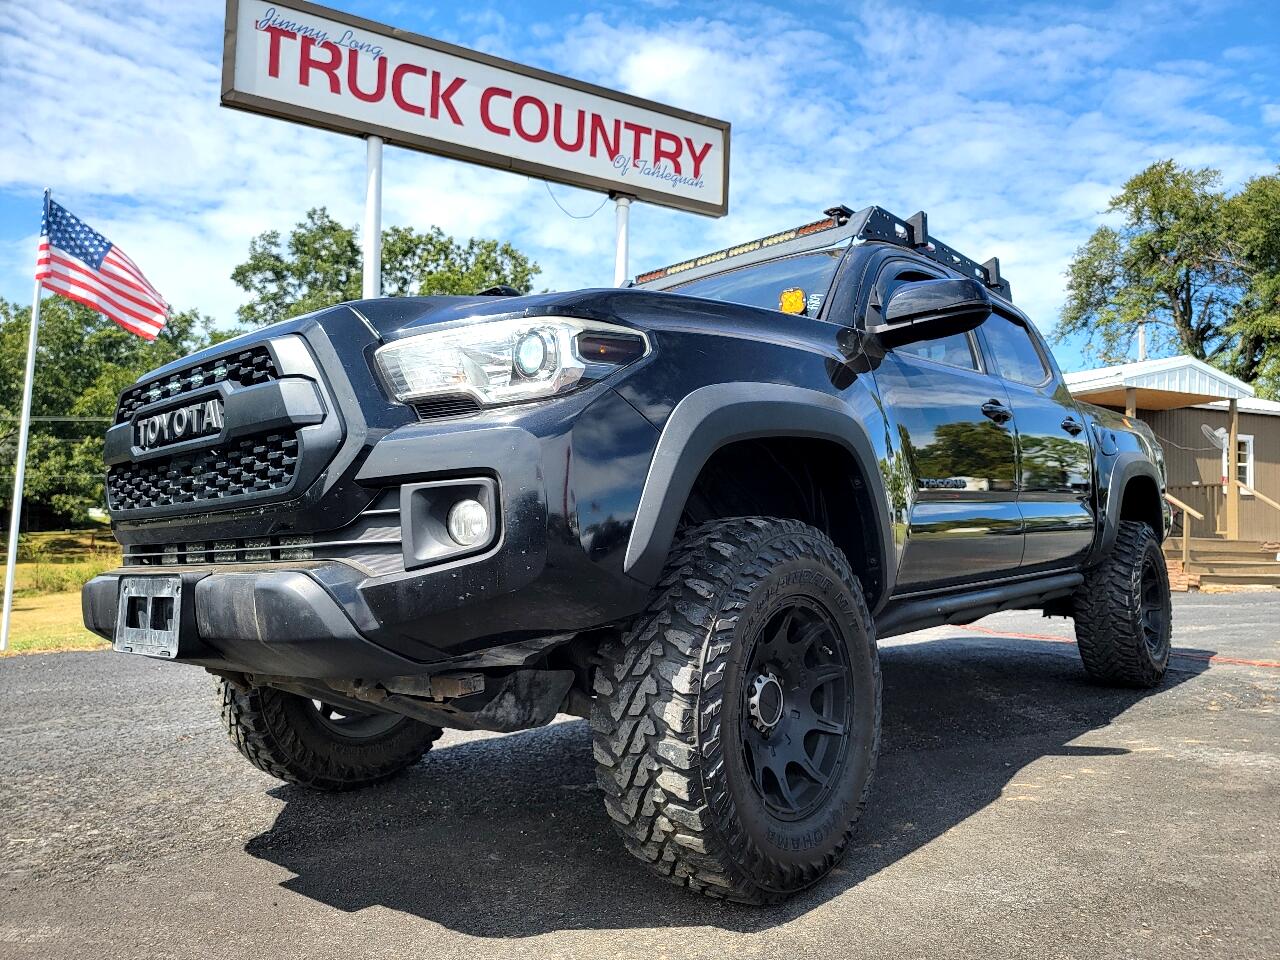 2018 Toyota Tacoma SR5 Double Cab Long Bed V6 6AT 4WD